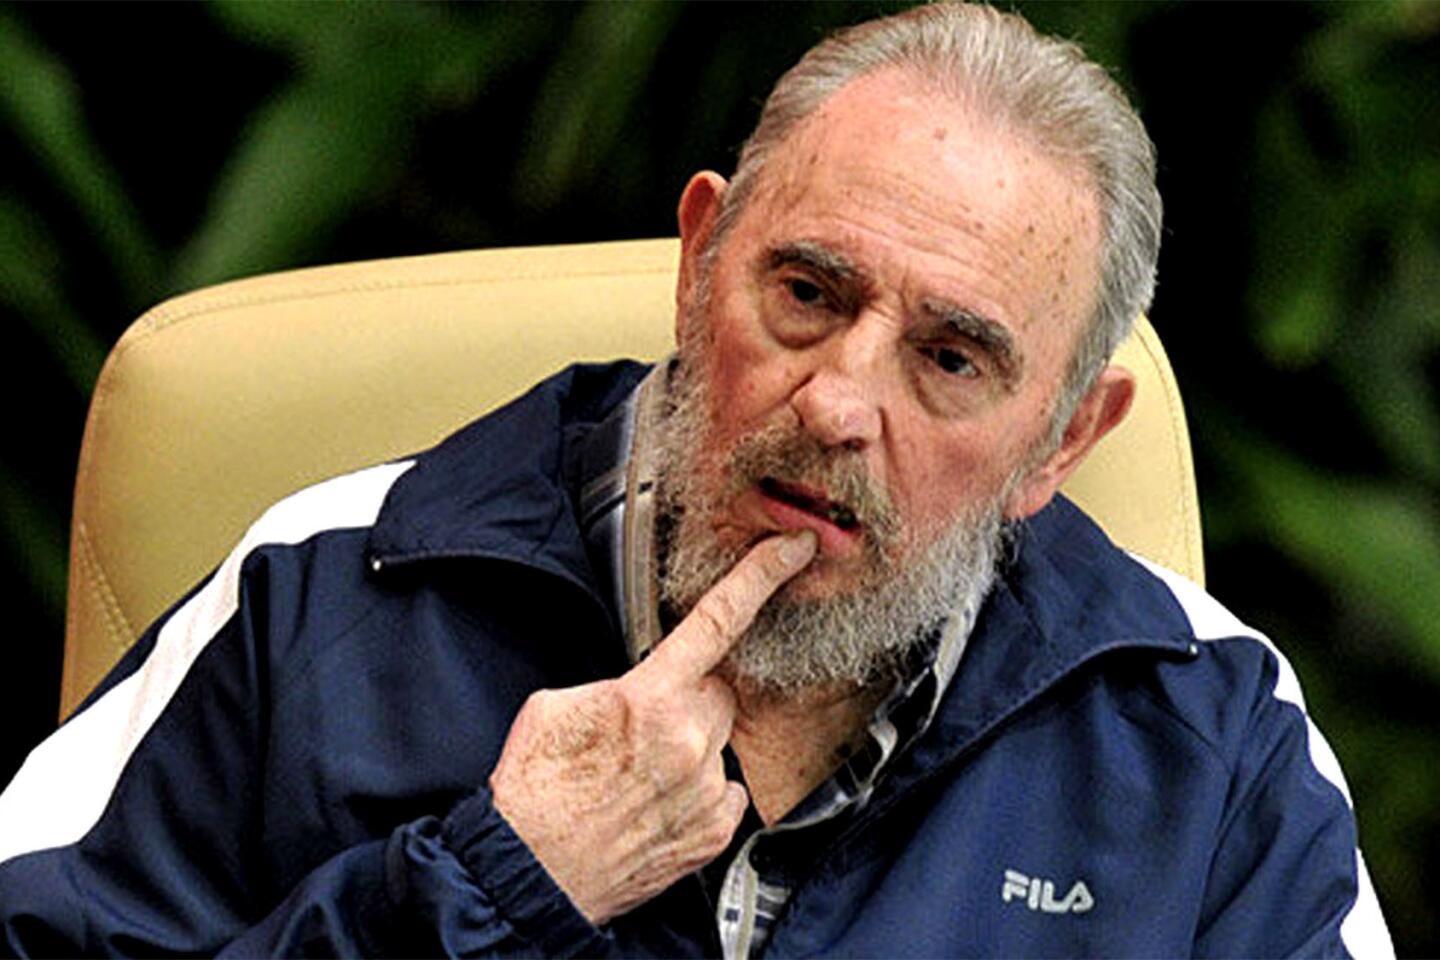 The life and times of Fidel Castro